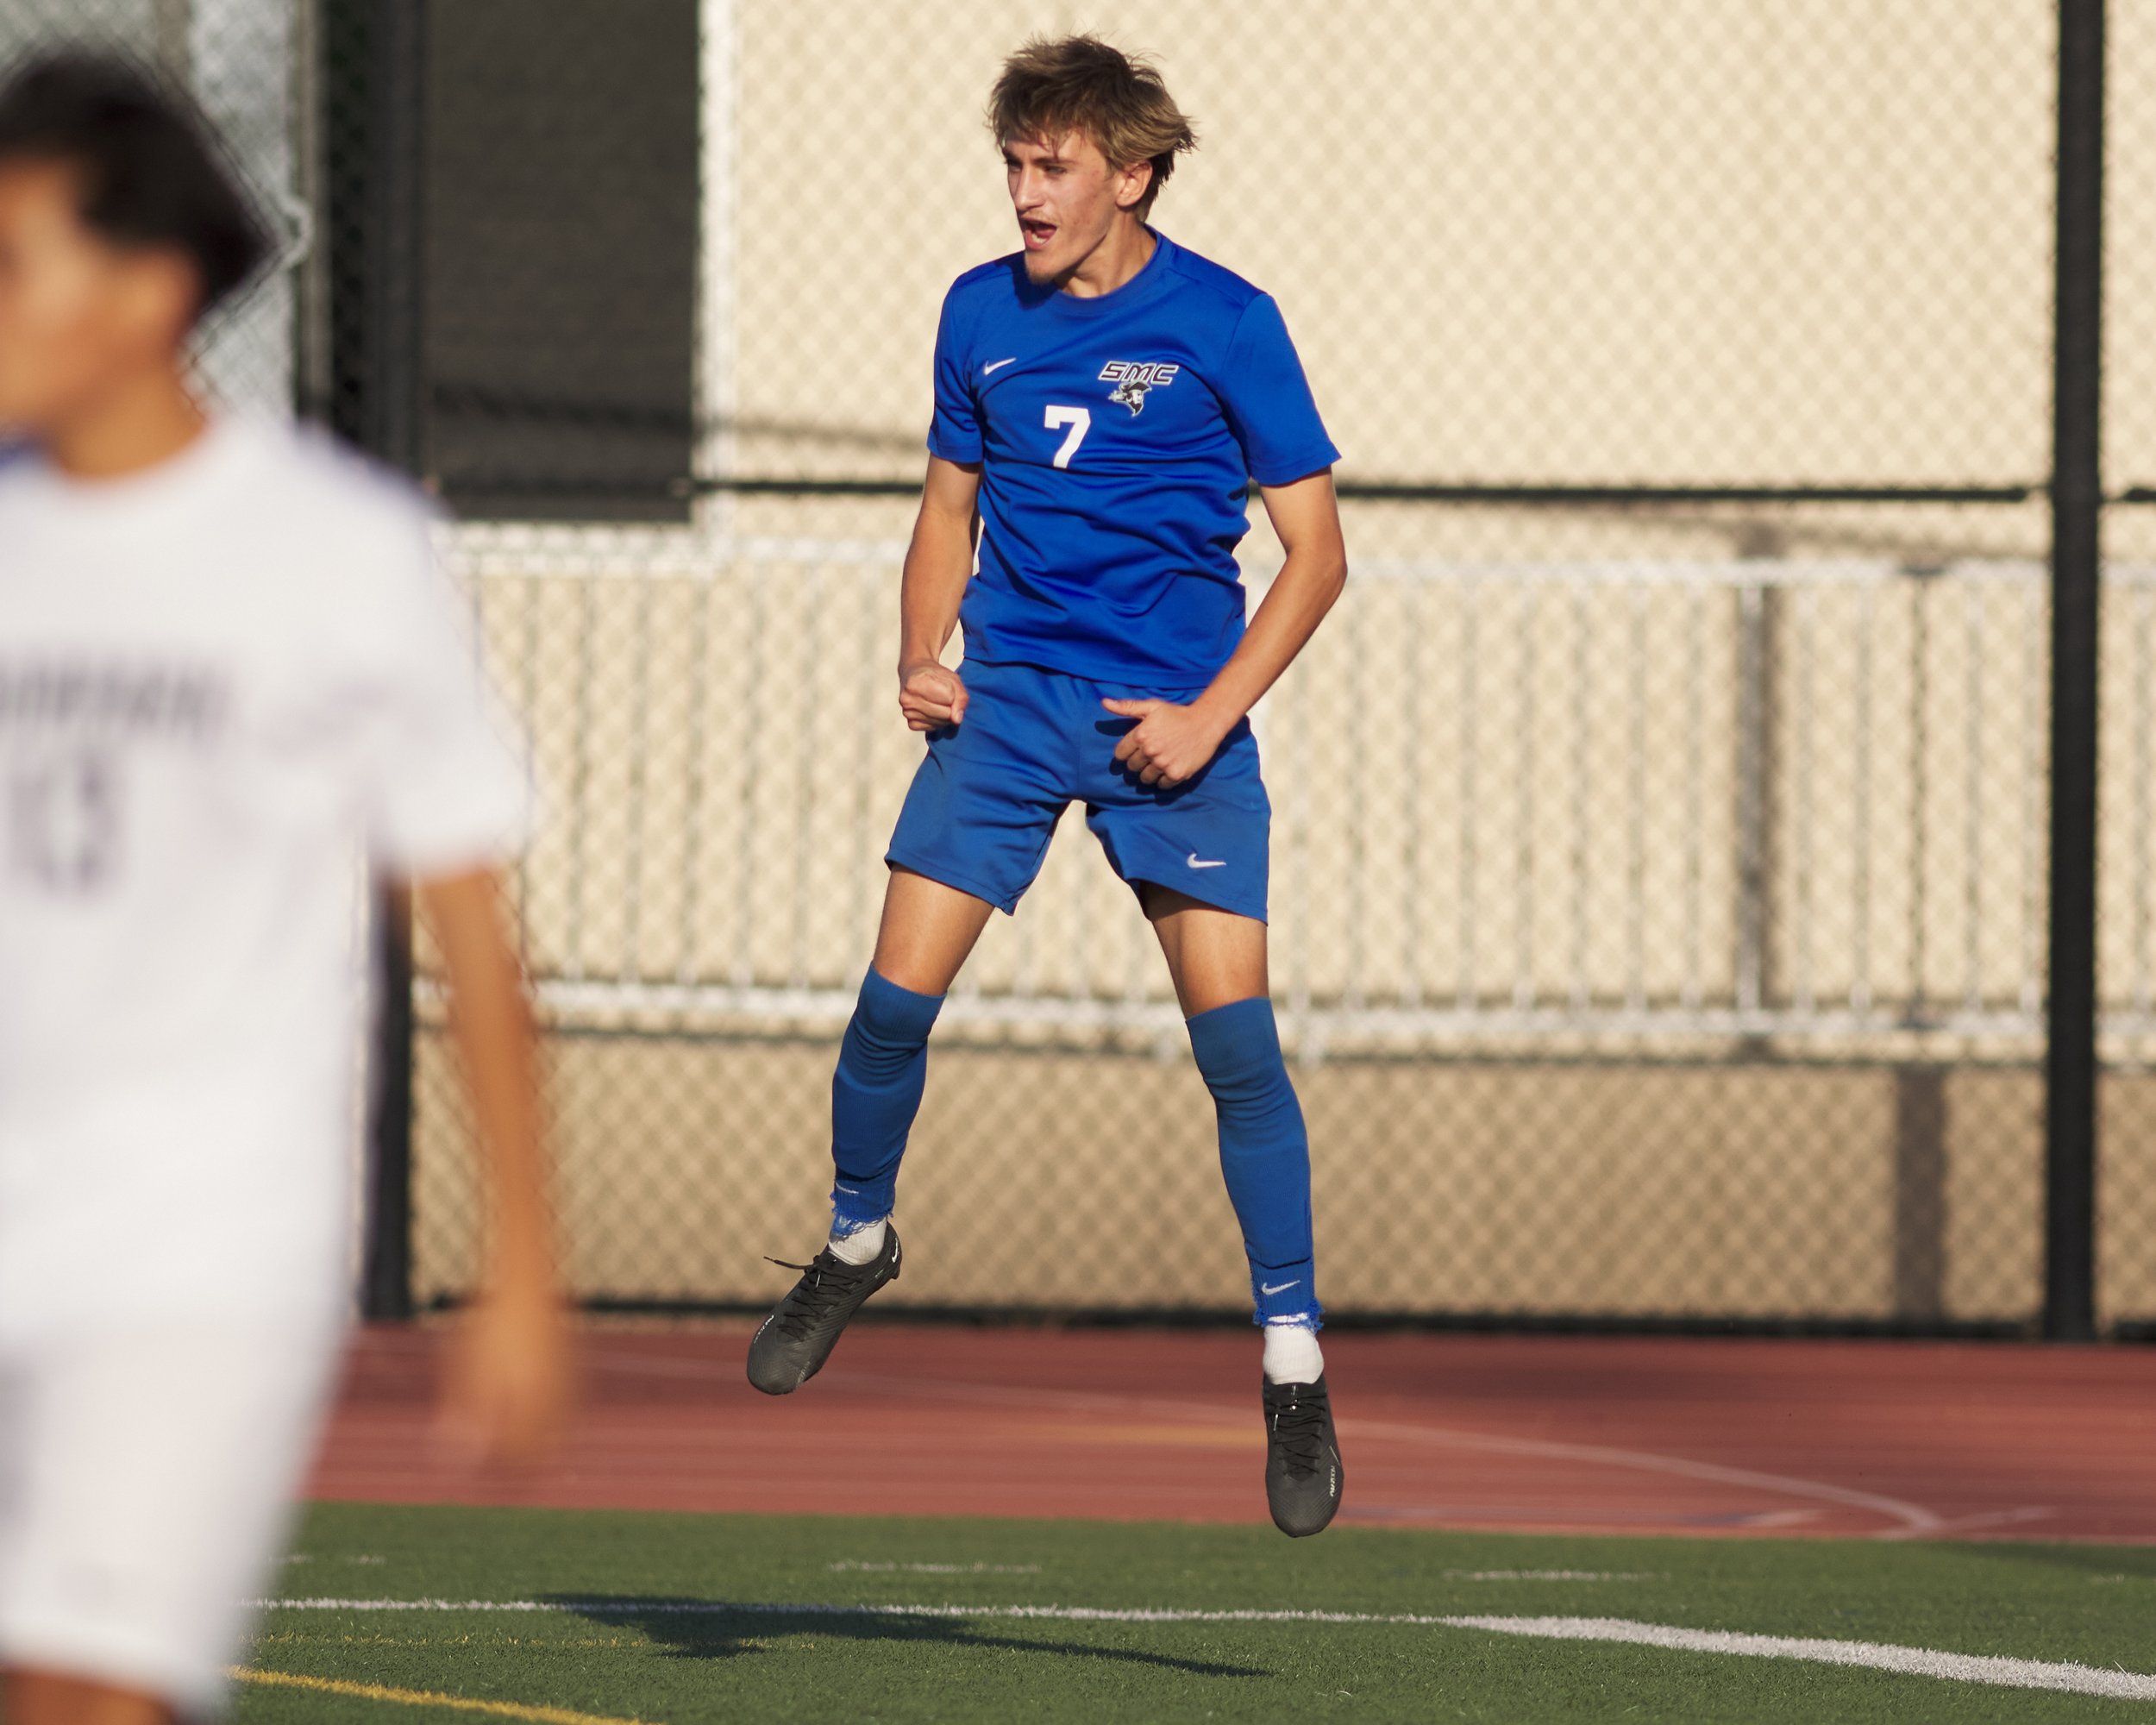  Santa Monica College Corsairs' Darren Lewis leaps in the air after scoring a goal during the men's soccer match against the Moorpark College Raiders on Thursday, Nov. 9, 2023, at Corsair Field in Santa Monica, Calif. The Corsairs won 7-0. (Nicholas 